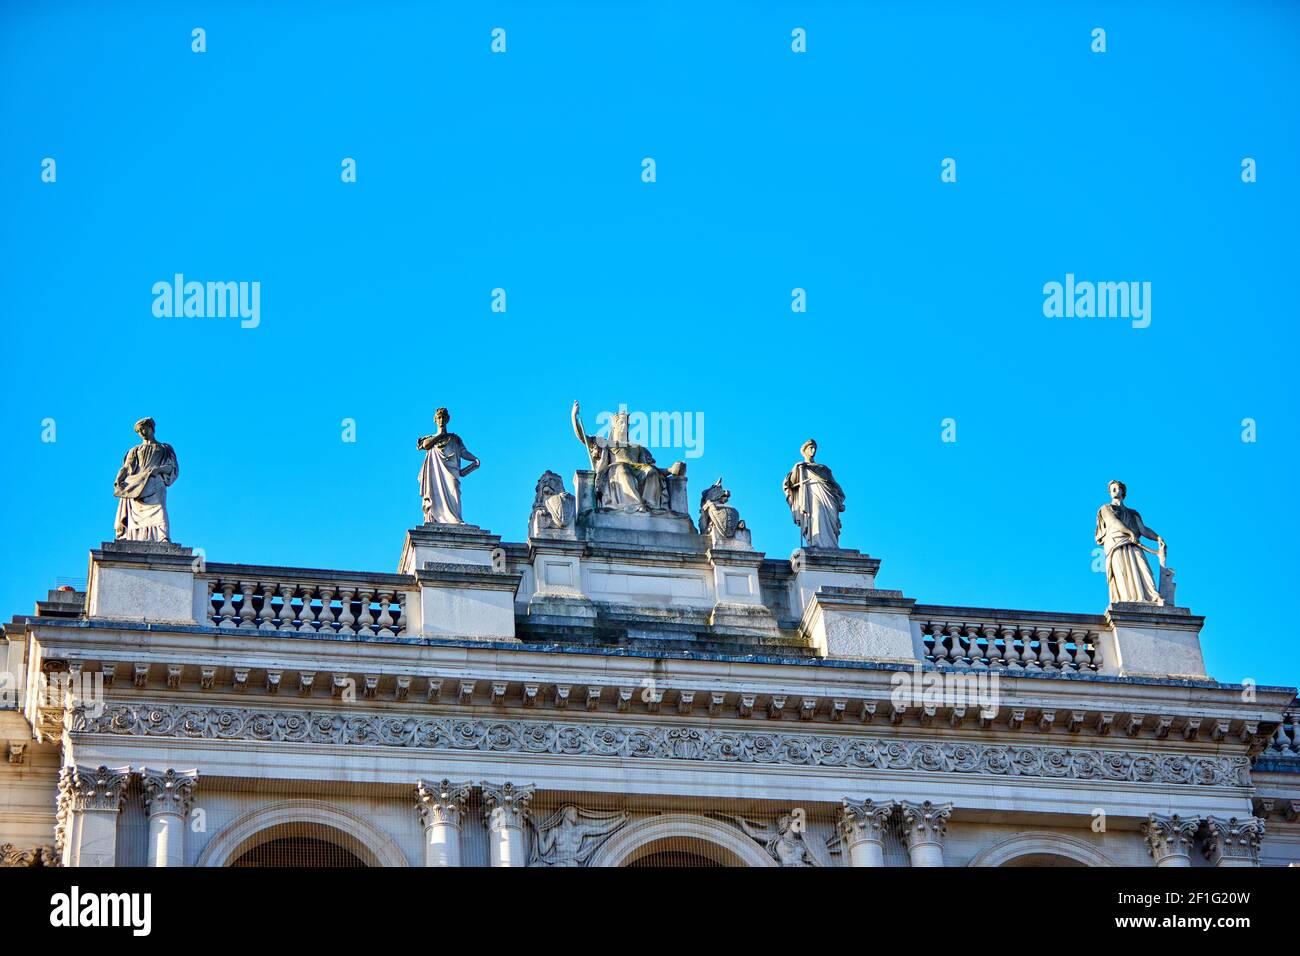 Statues of Britannia and her companions by Henry Hugh Armstead and J. Birnie Philip on the top frontage of the Foreign and Commonwealth Office overlooking Whitehall. Stock Photo